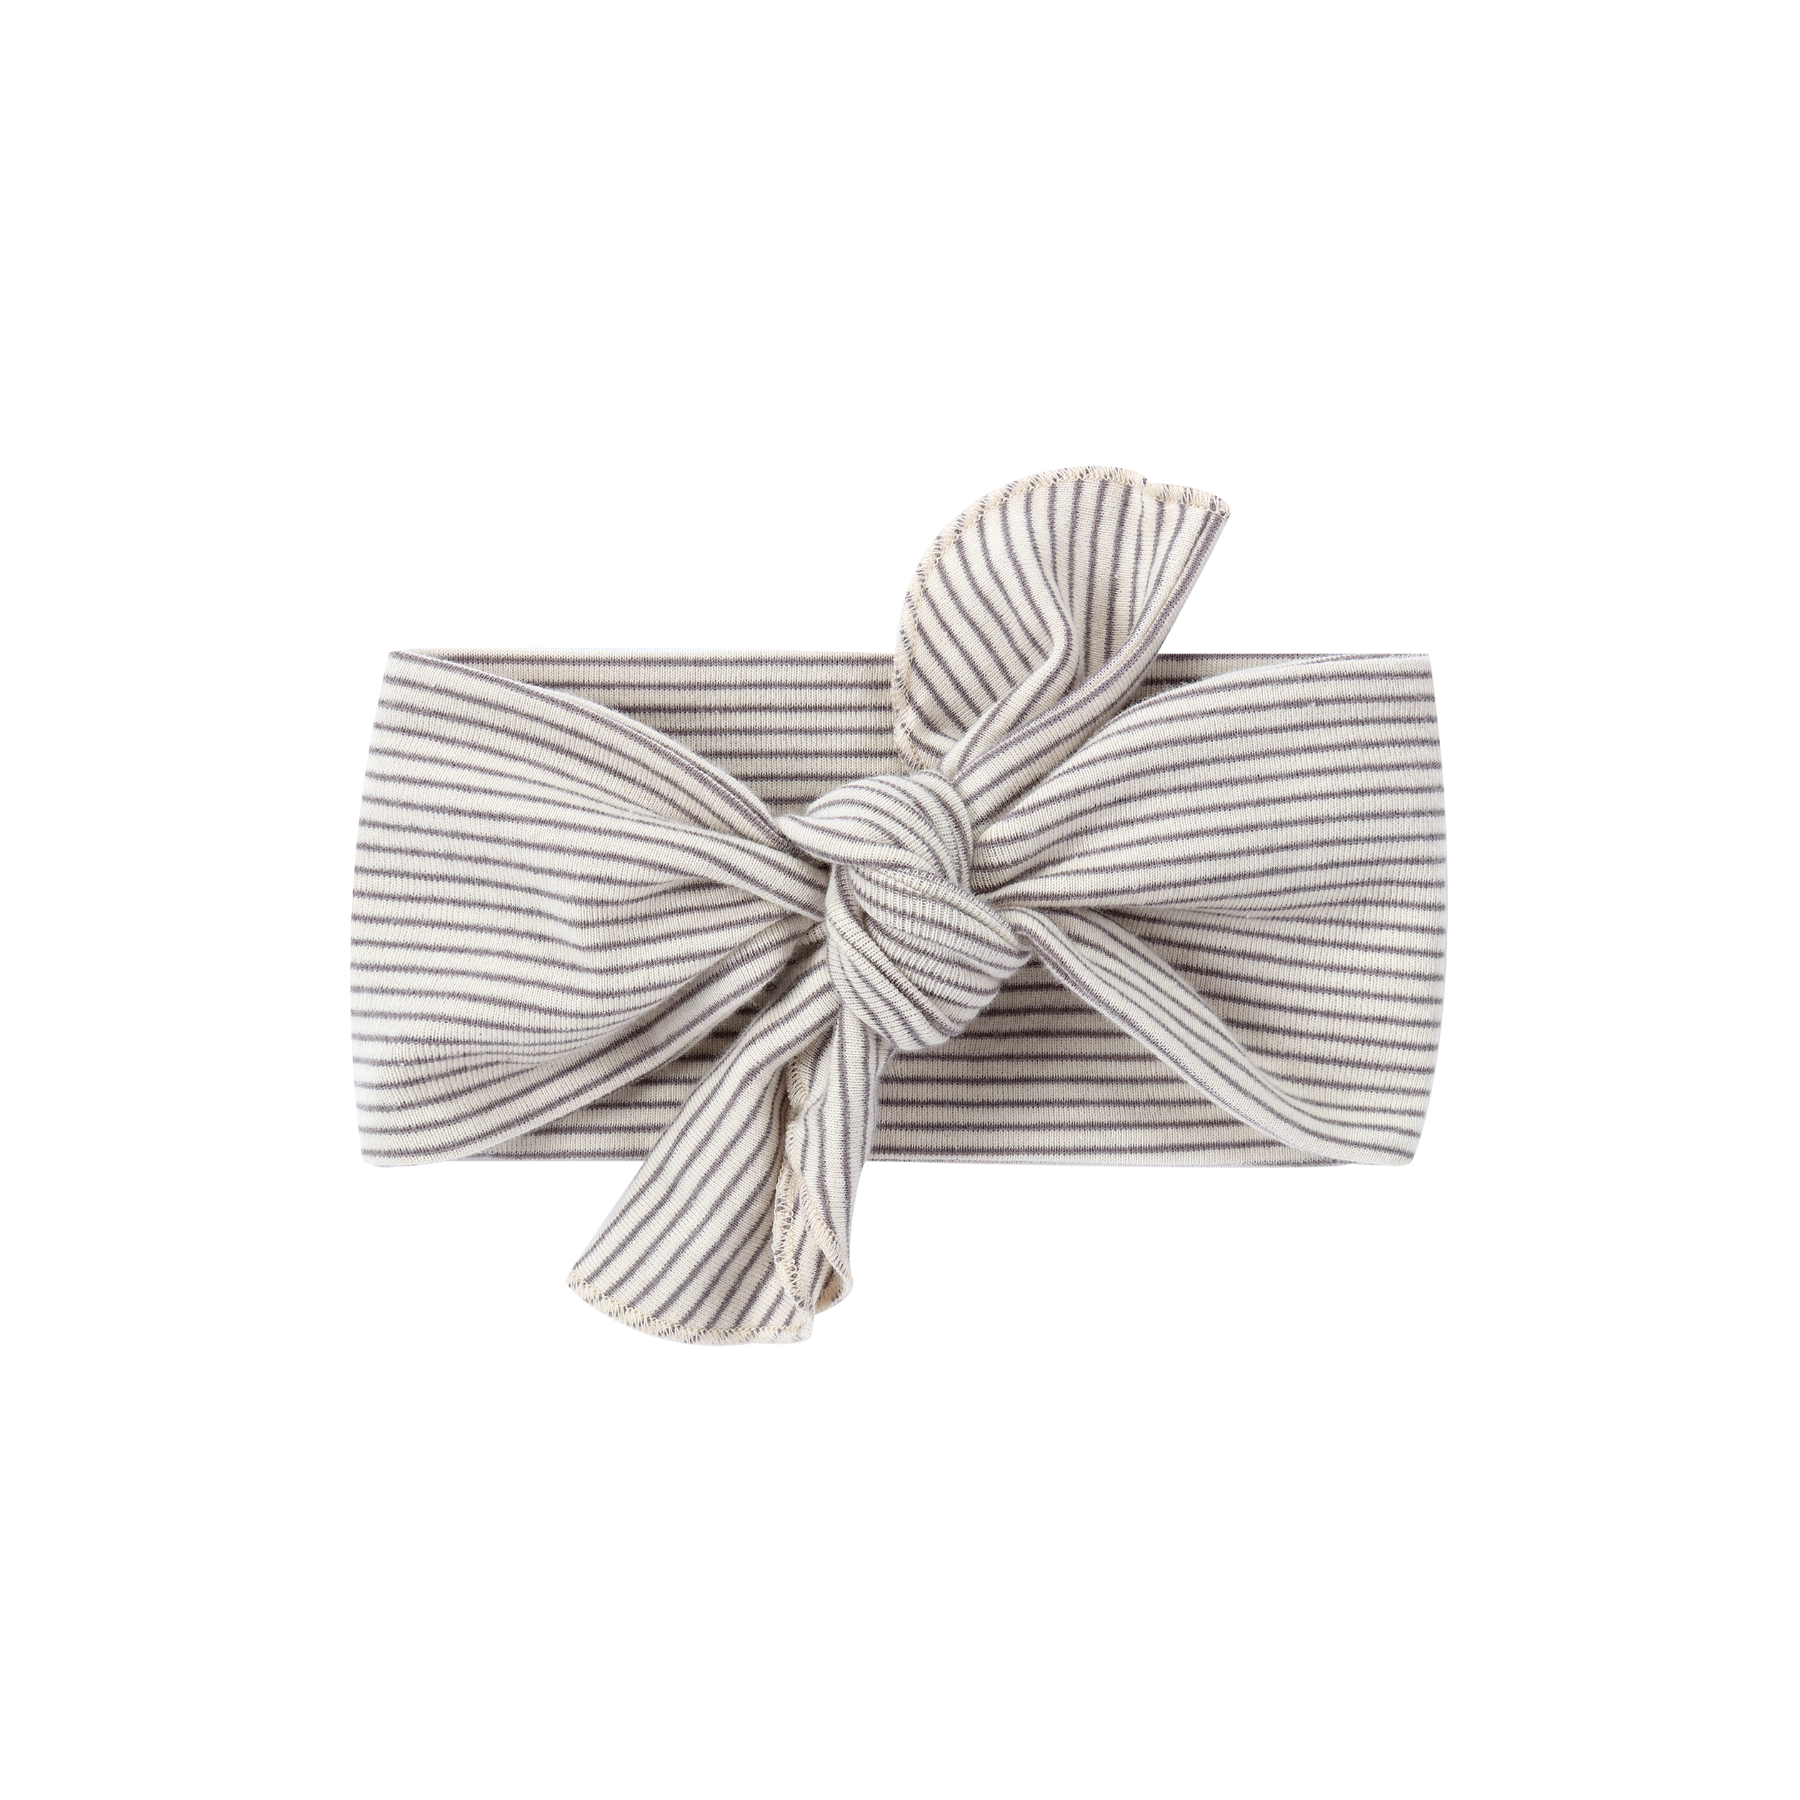 A beige and white striped Susukoshi headband with a bow.